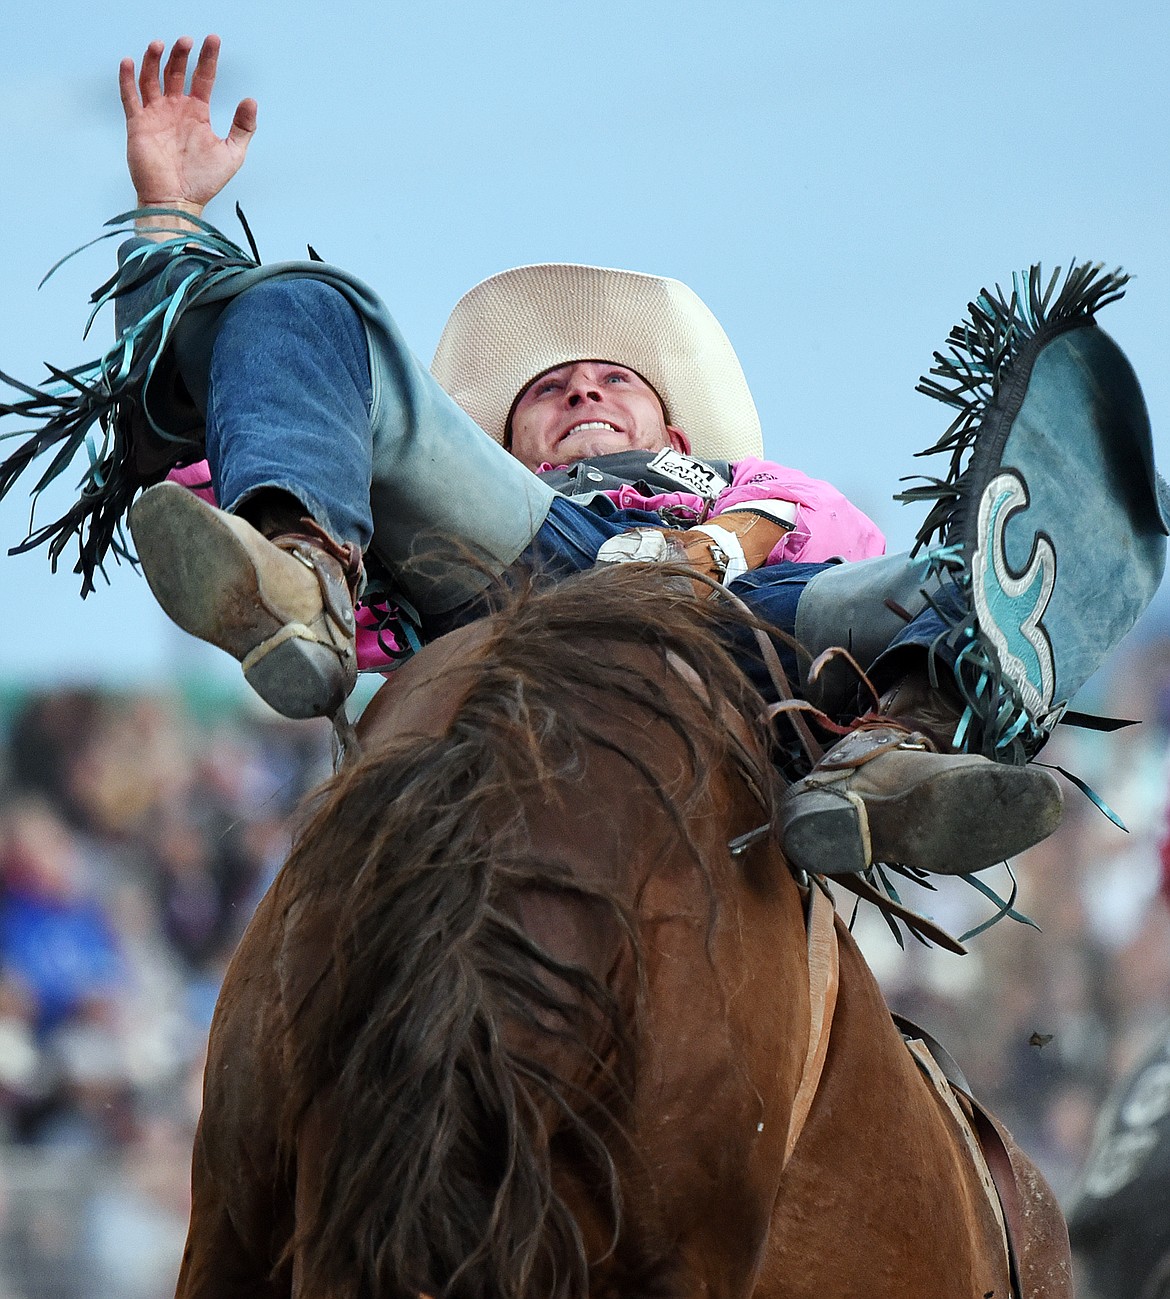 Trenten Montero, from Winnemucca, Nev., holds on to his horse Double Dippin' during bareback riding at the Northwest Montana Fair PRCA Rodeo at the Flathead County Fairgrounds on Friday. (Casey Kreider/Daily Inter Lake)